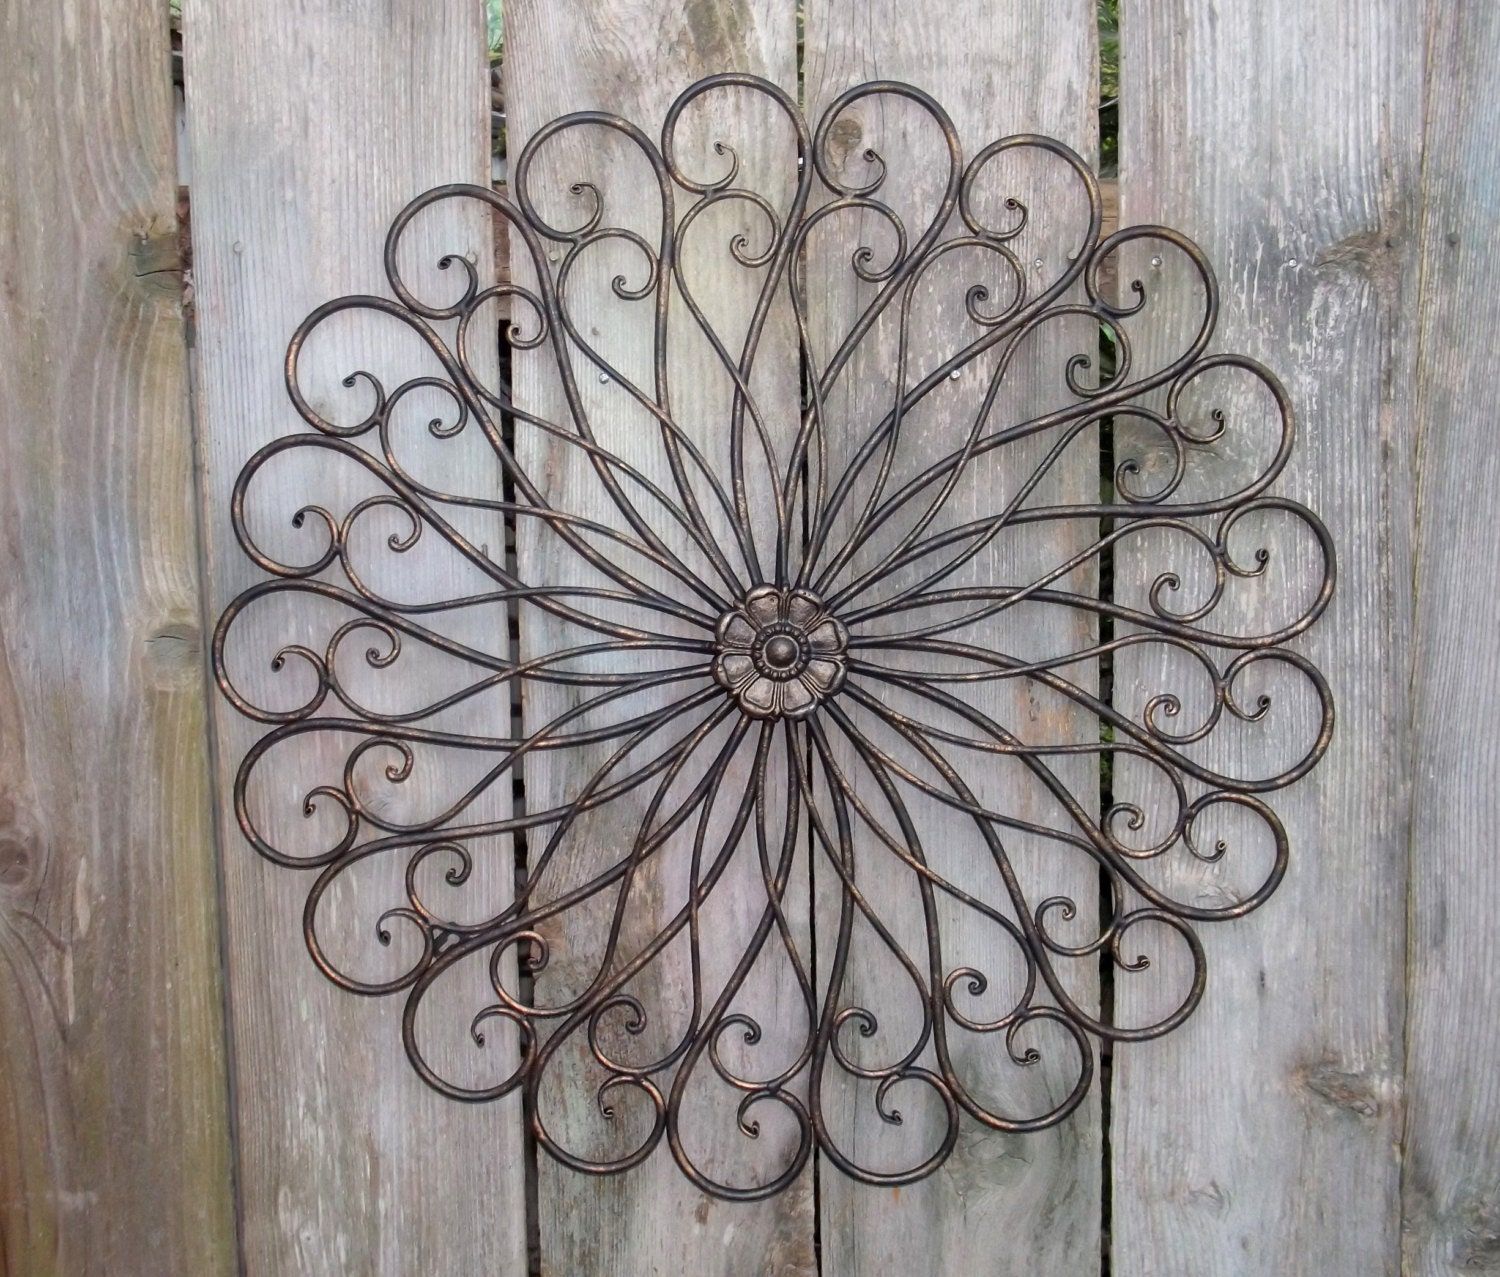 Rod Iron Wall Art – Wrought Iron Wall Art Metal Iron Frame Rustic Birds Inside Large Wall Decor Ornaments (View 2 of 15)